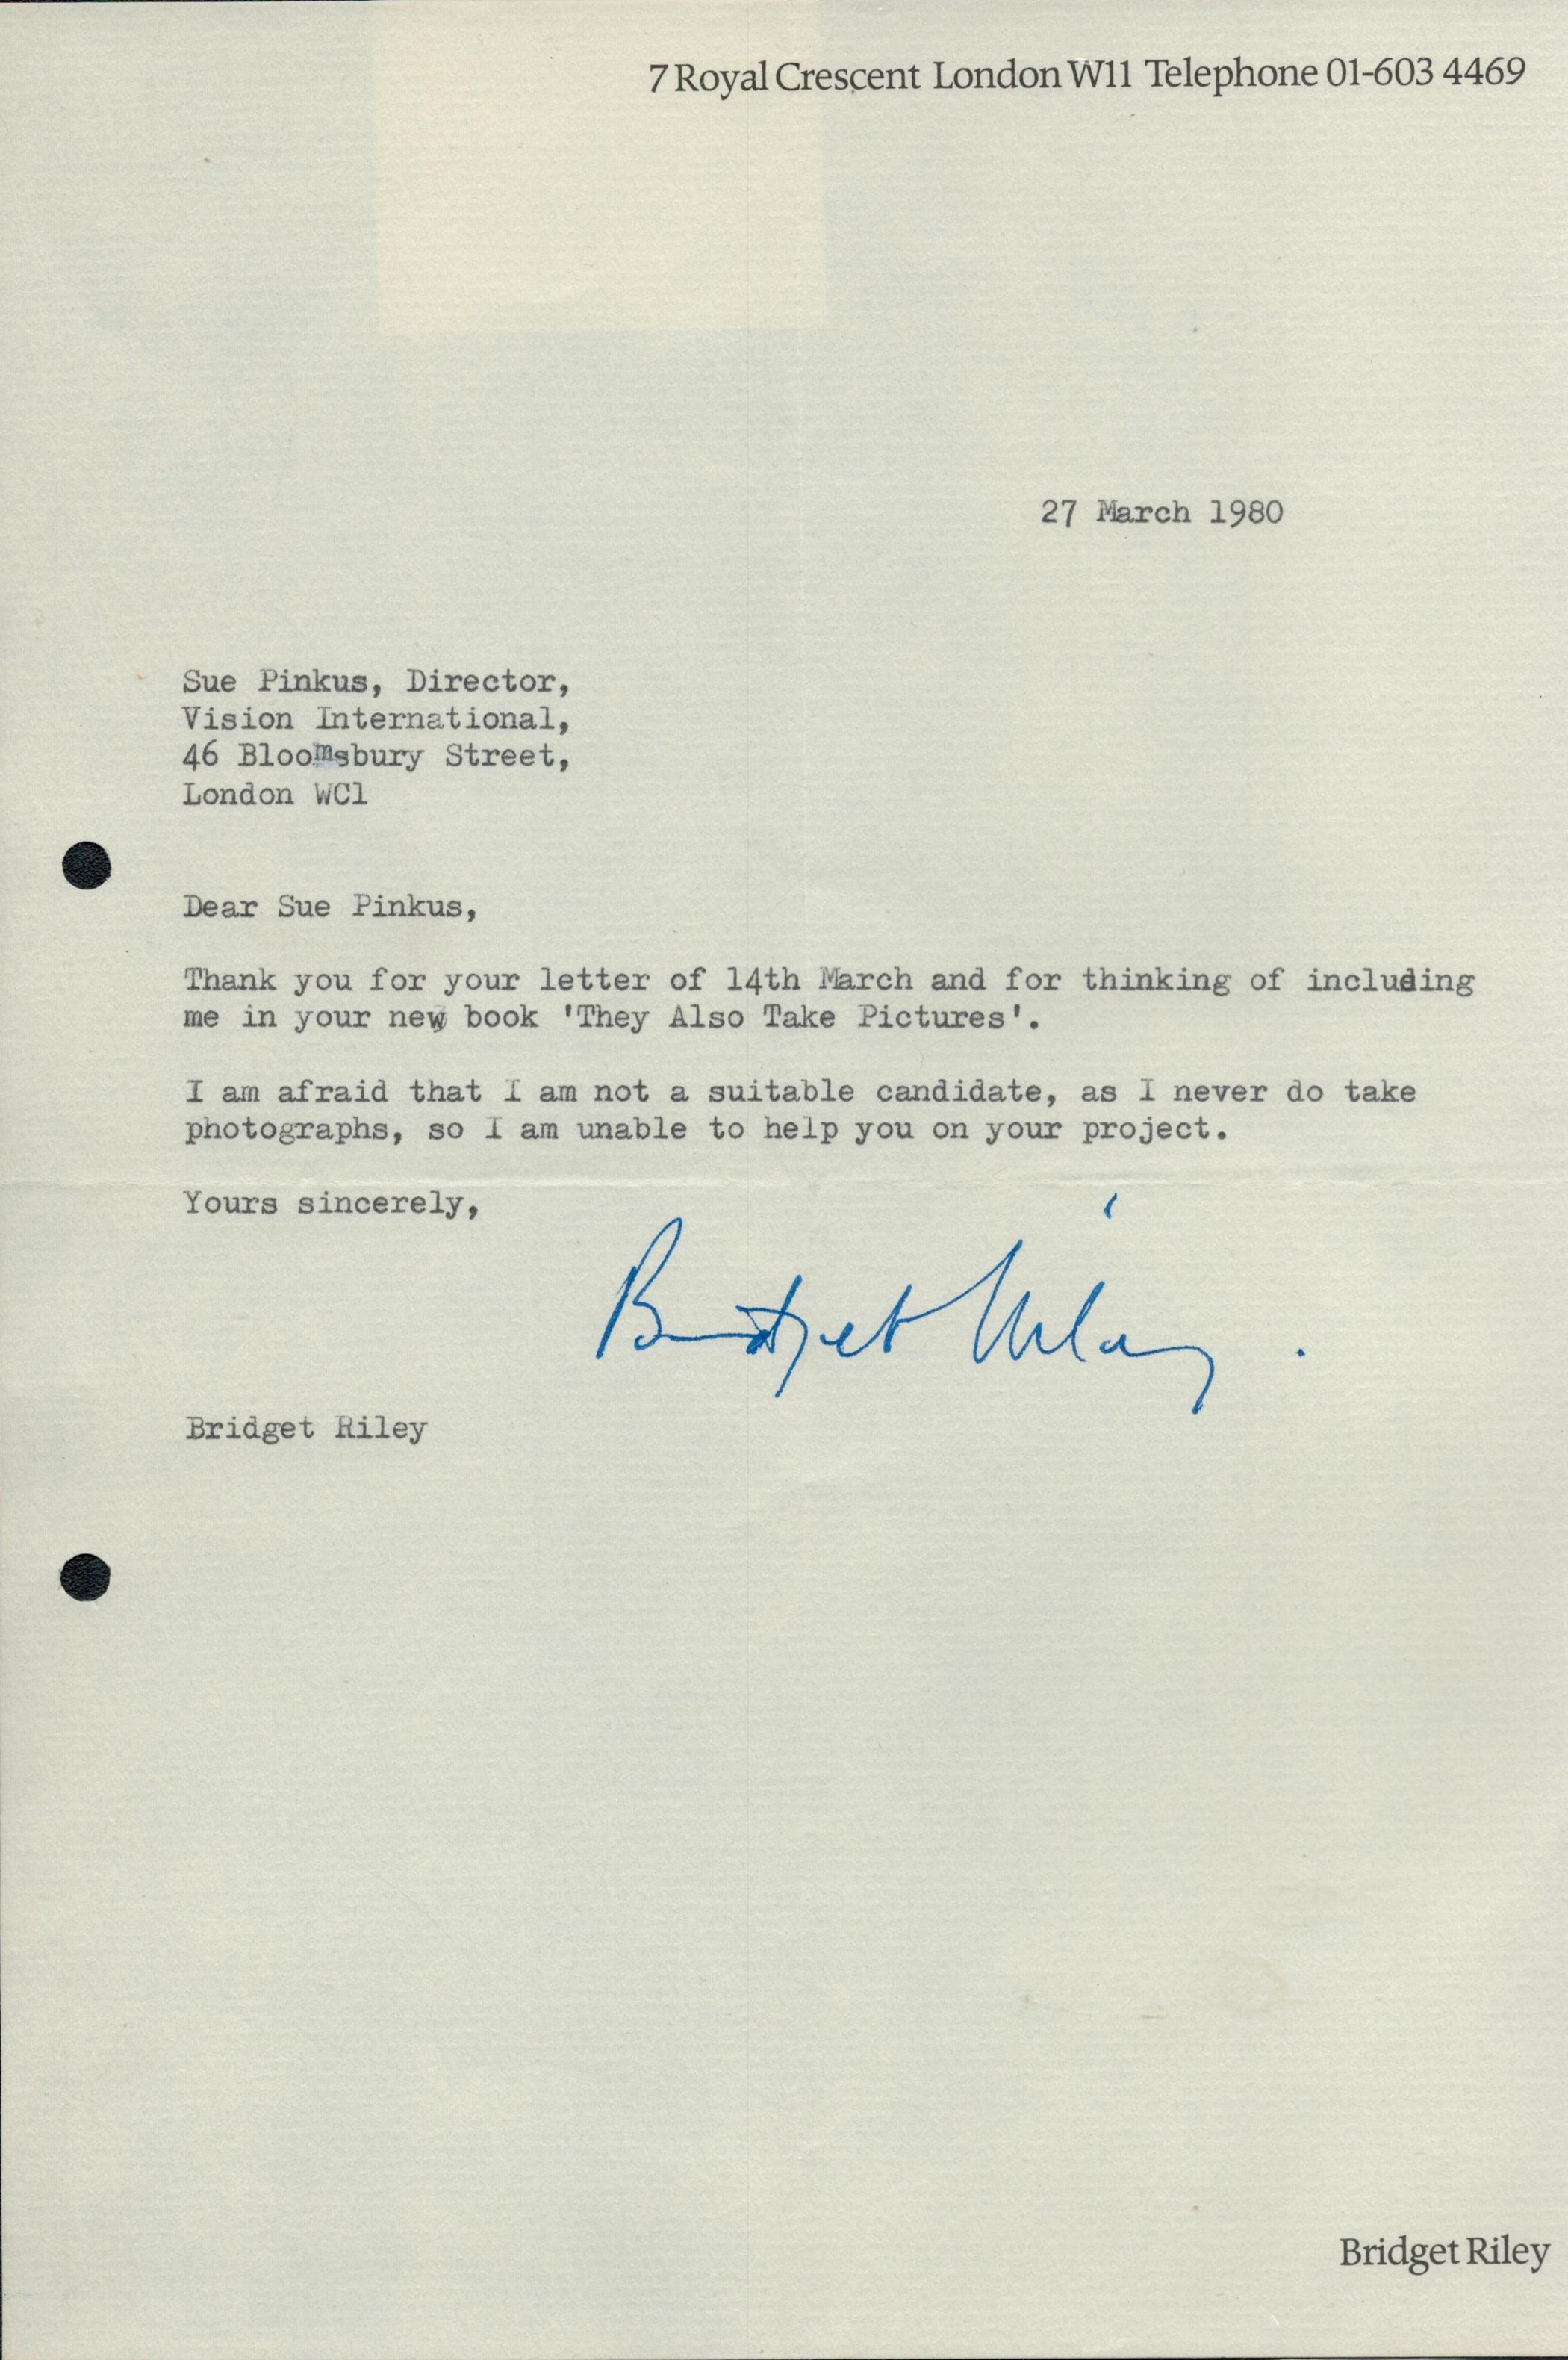 Bridget Riley TLS dated 27/3/1980 regarding inclusion in bookAll autographs come with a